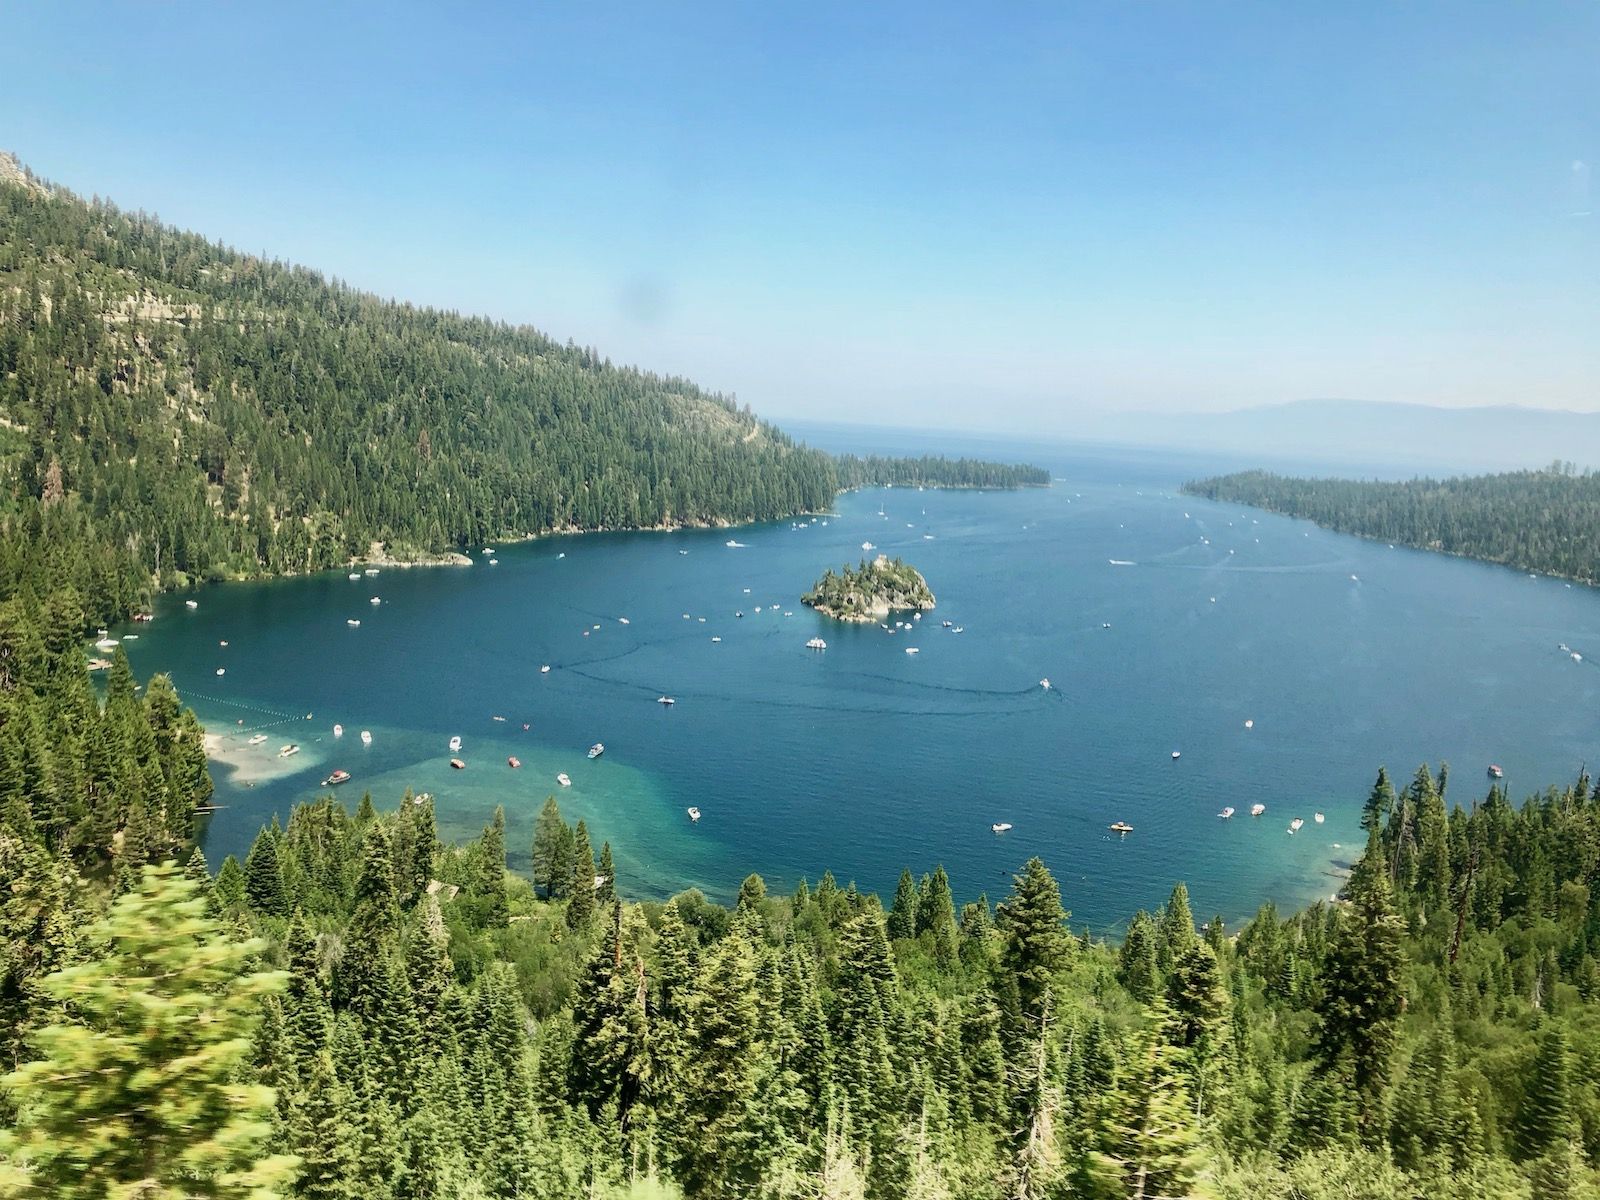 View of emerald bay from the bus.